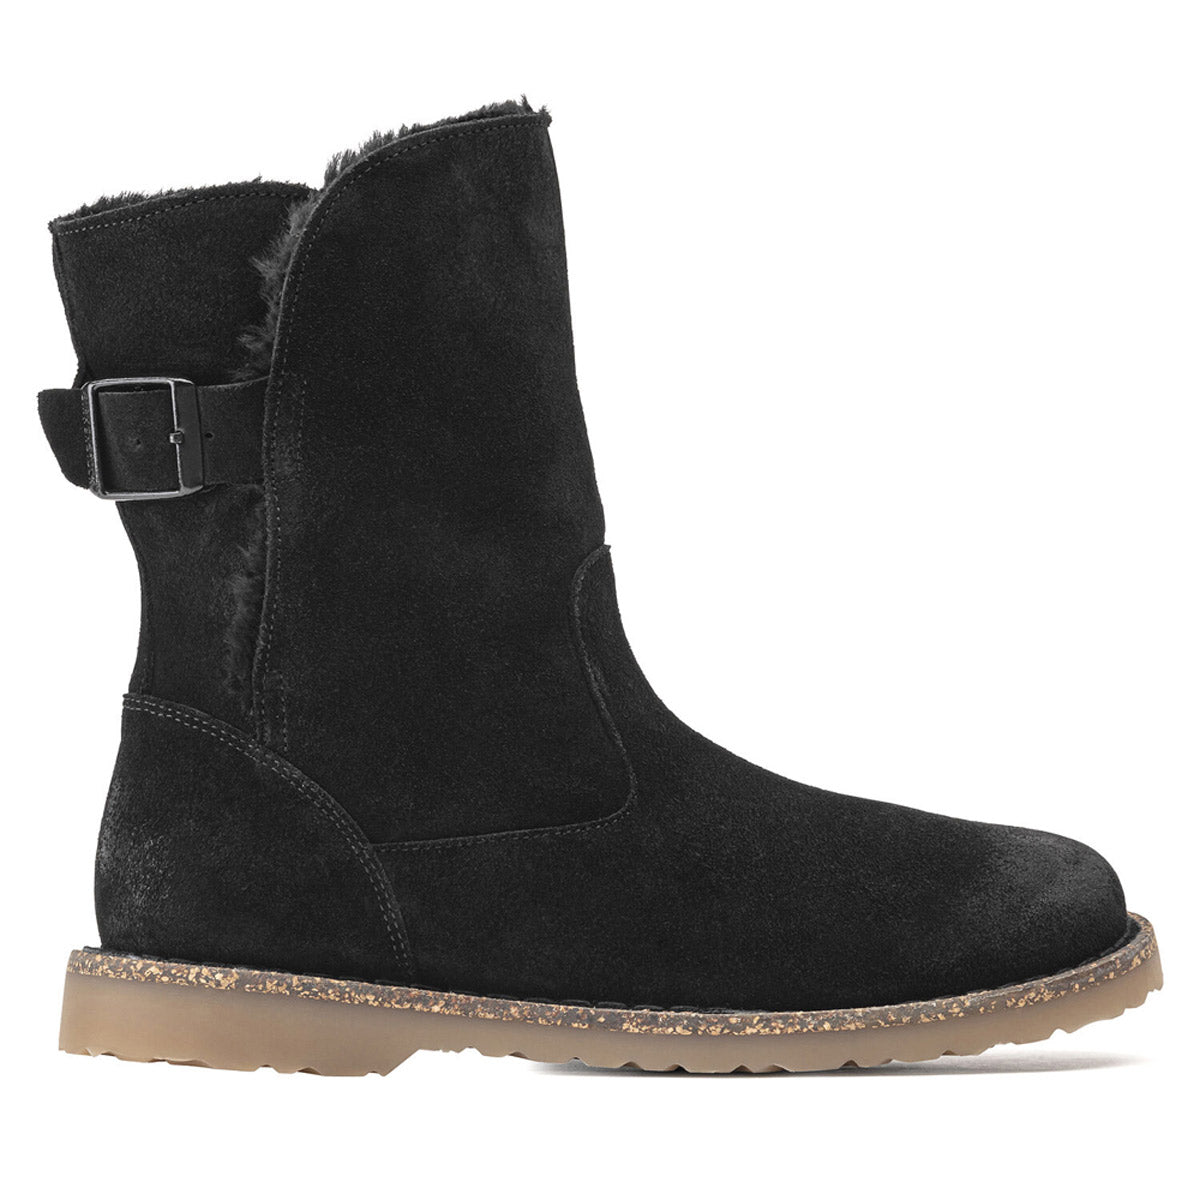 Side view of a black Birkenstock Upsalla Shearling boot with a buckle and fur lining.